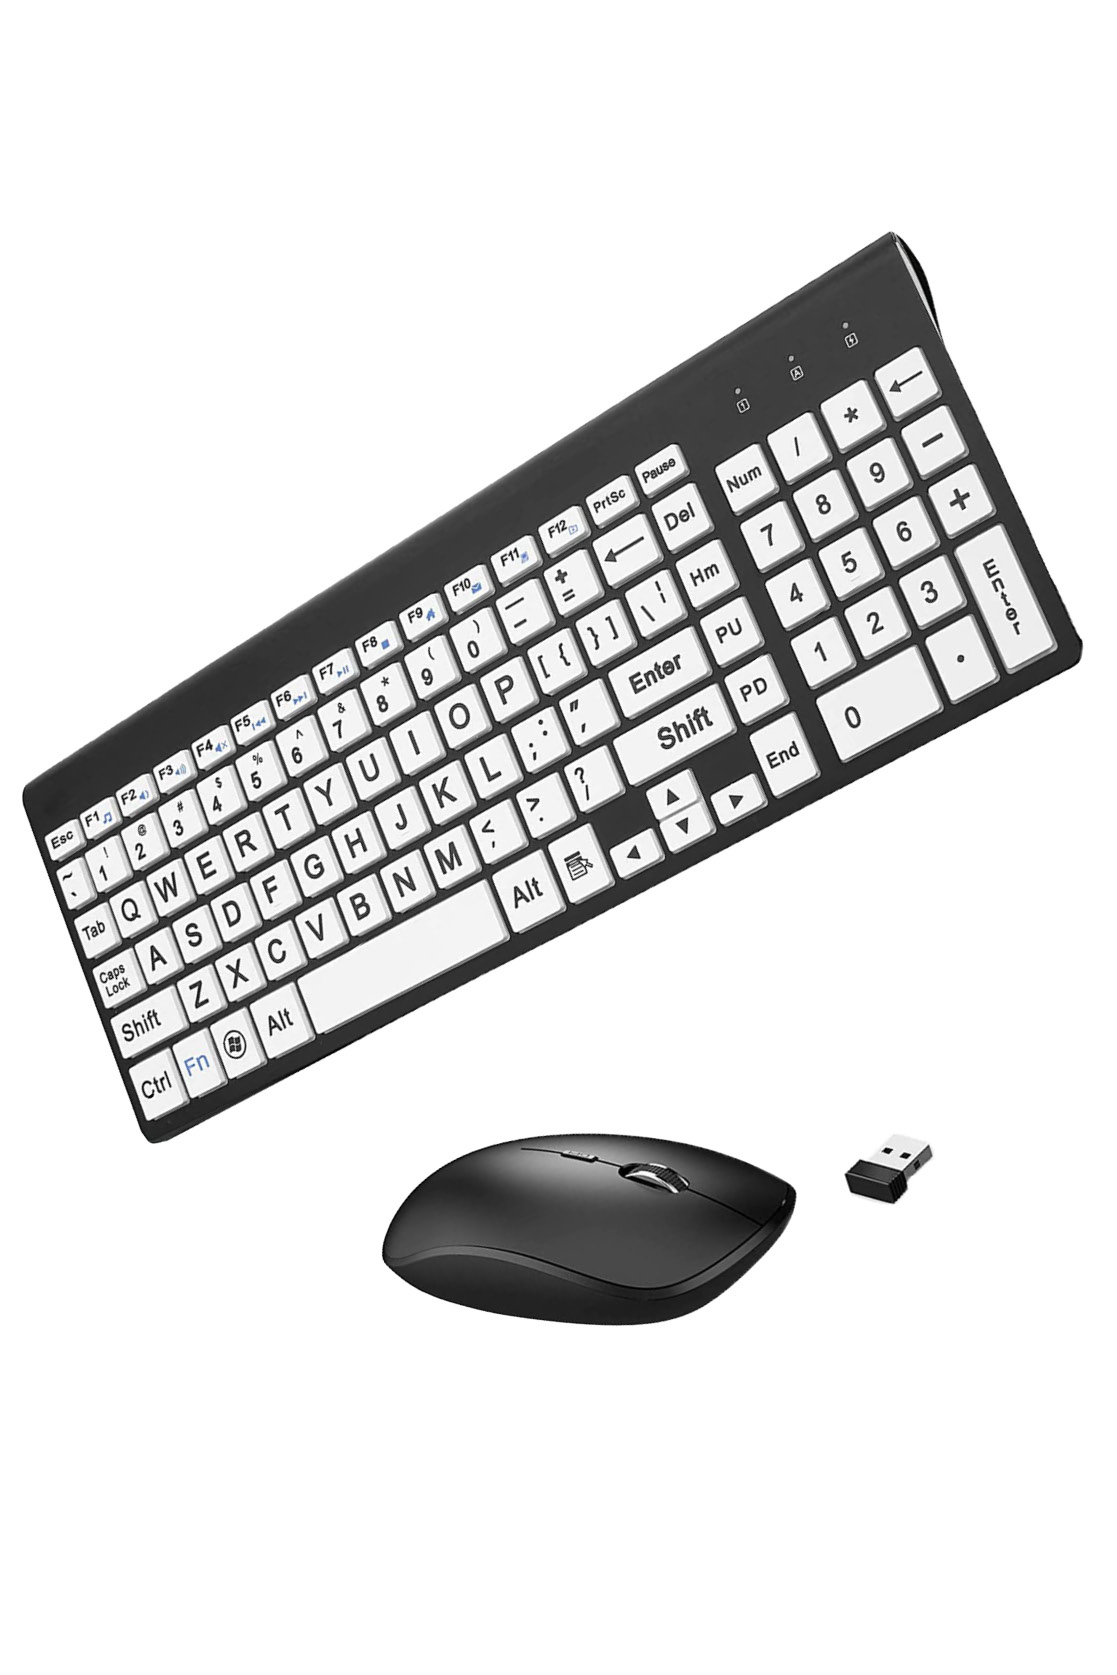 Large Print High Contrast Wireless Keyboard with Mouse